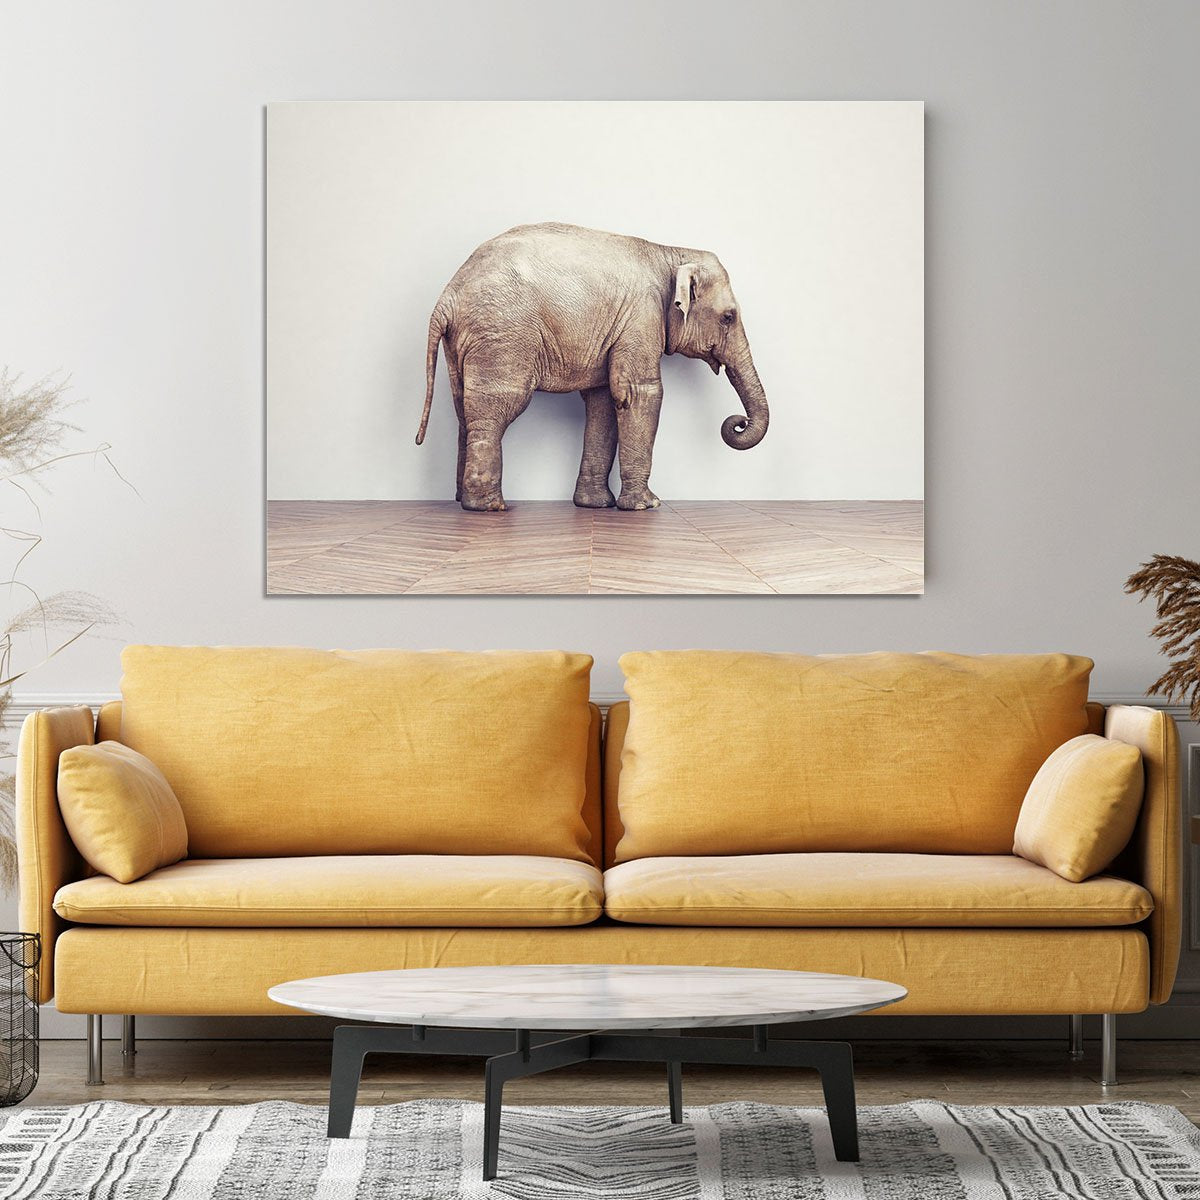 An elephant calm in the room near white wall. Creative concept Canvas Print or Poster